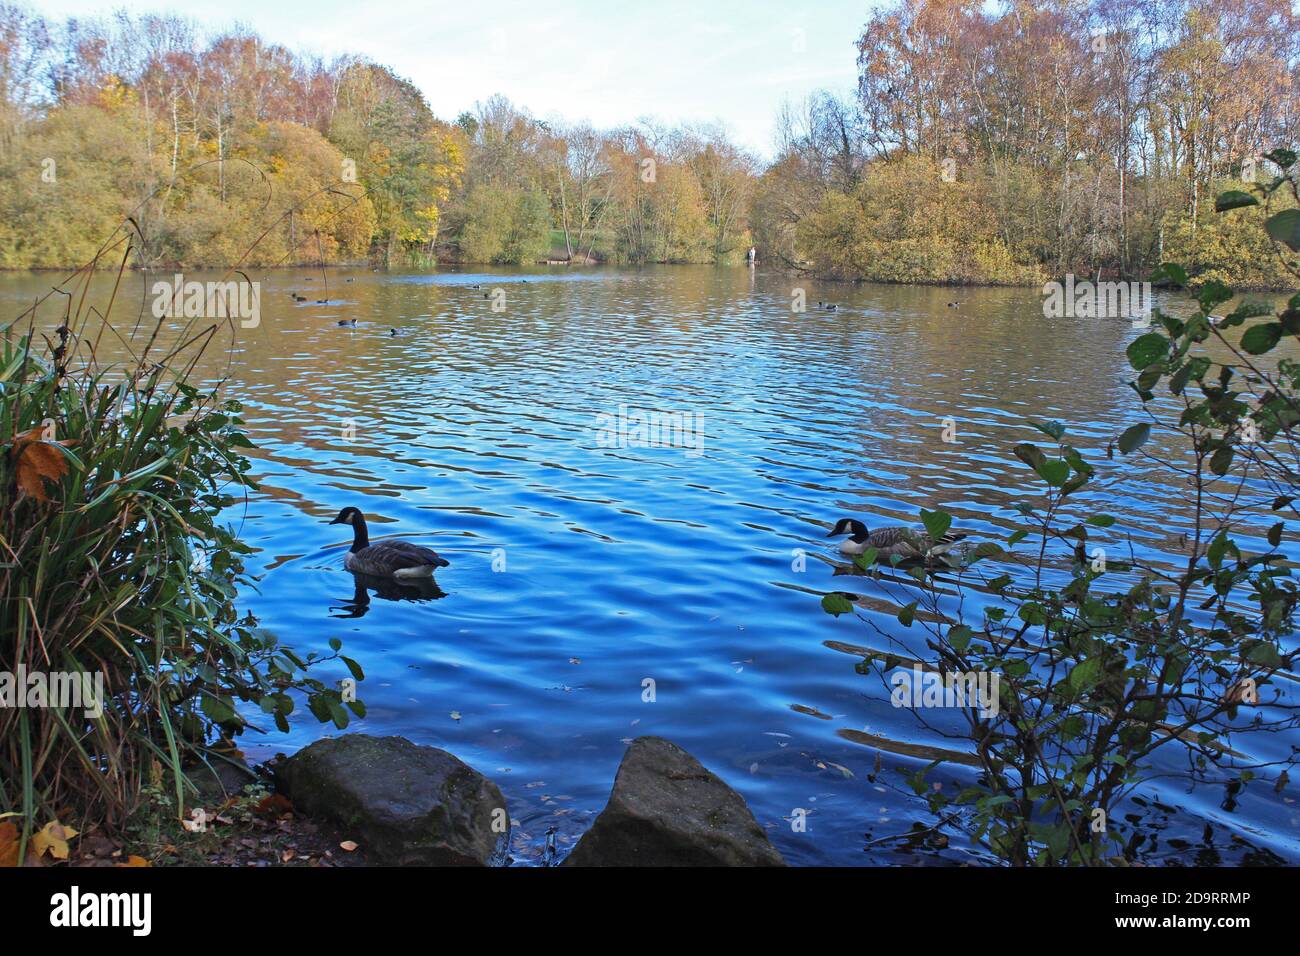 Big blue lake with Canada geese swimming and big autumn bushes and trees on the banks in Chorlton water park, England Stock Photo